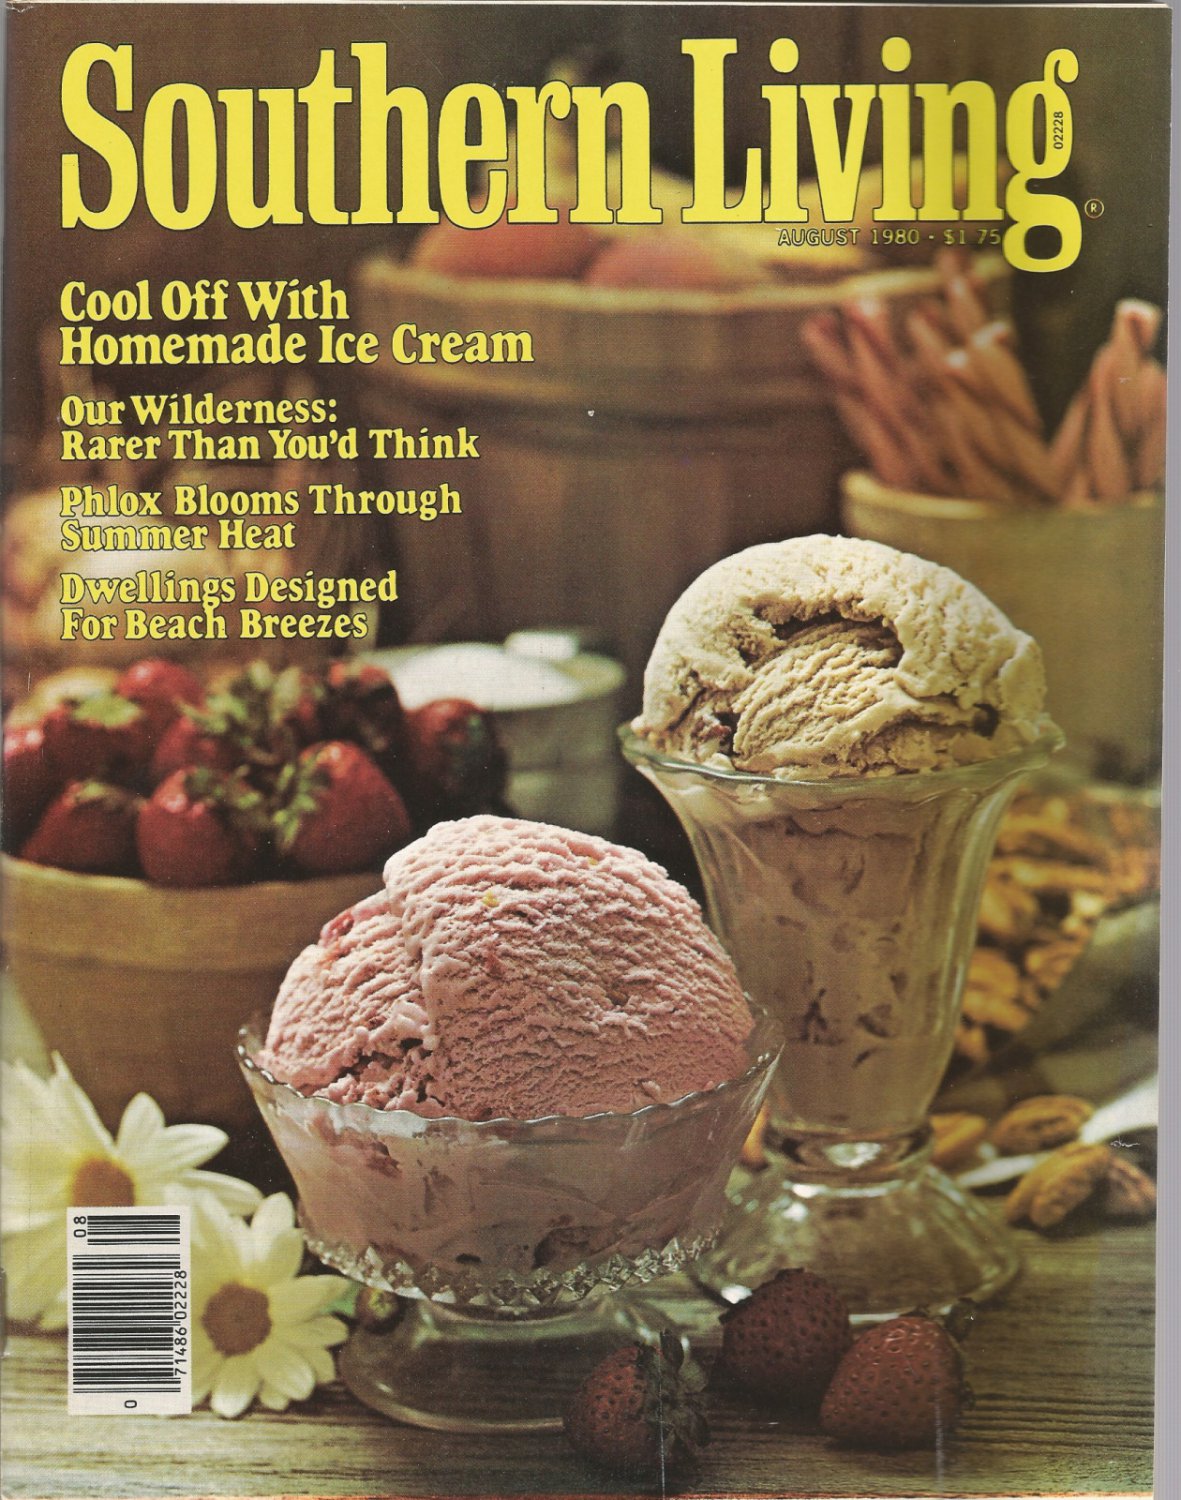 Southern Living magazine- August 1980- Dwellings designed for beach breezes